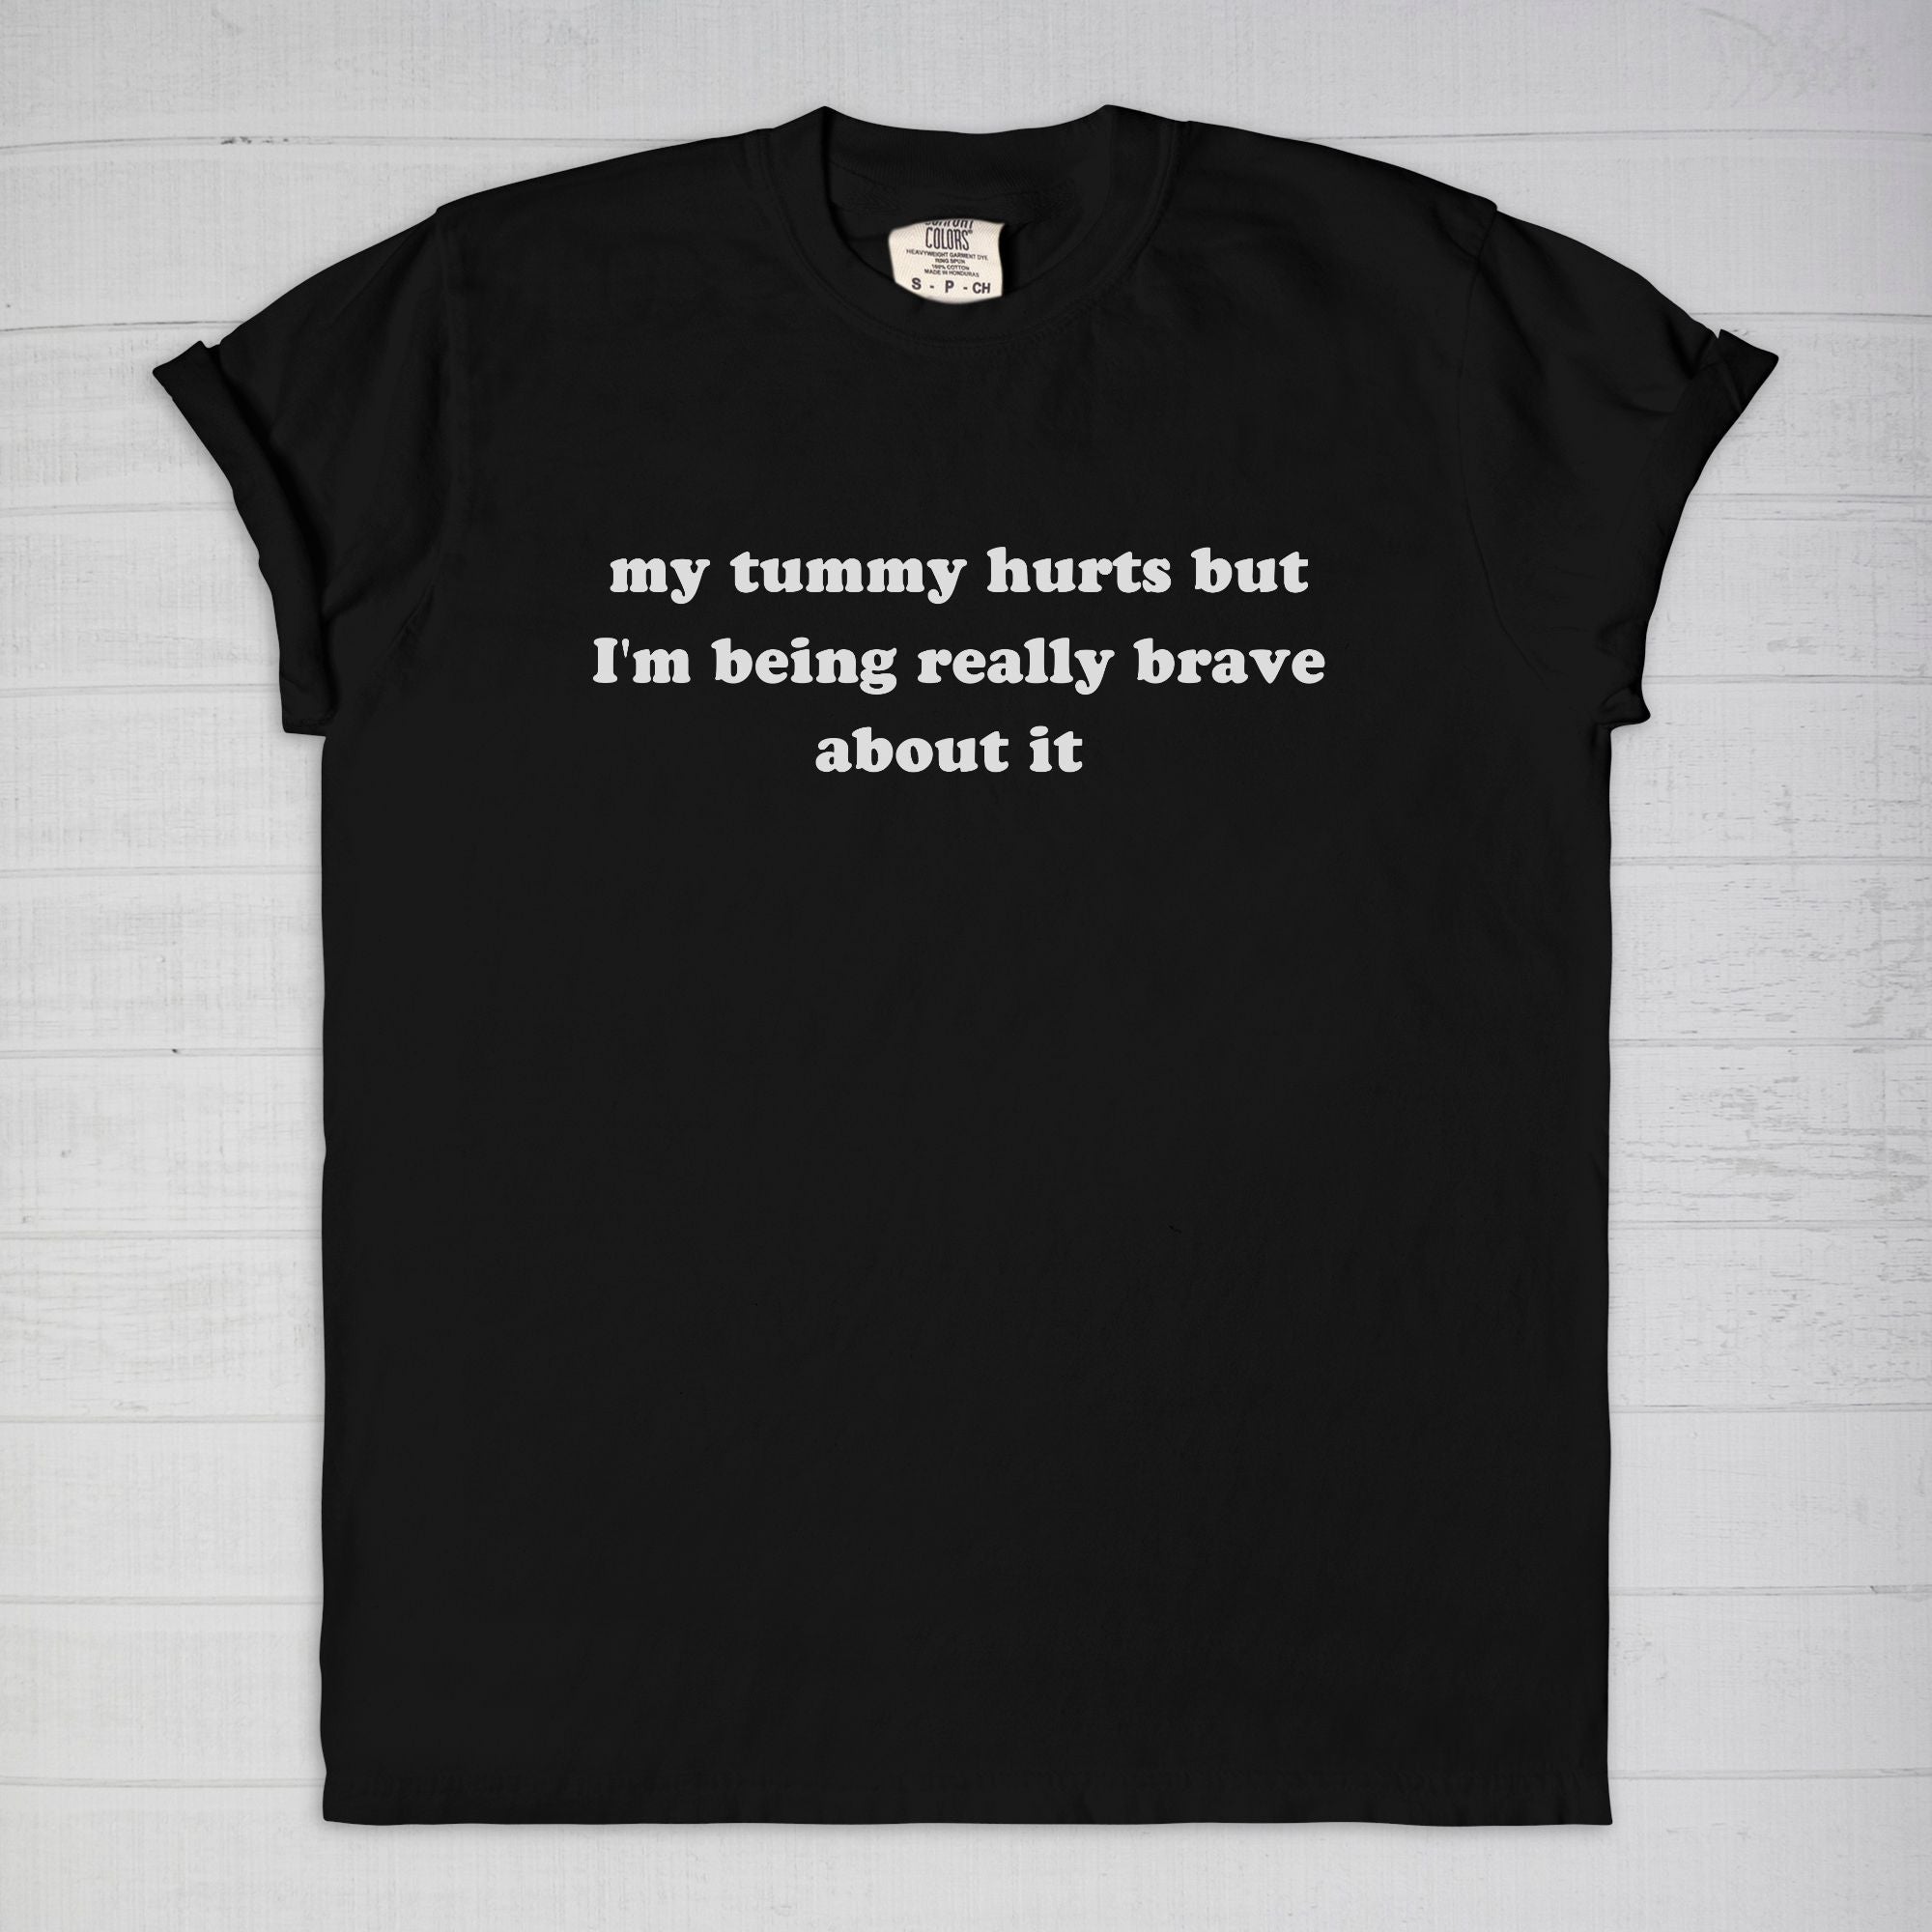 My Tummy Really Hurts But I'm Being Very Brave About It Tee